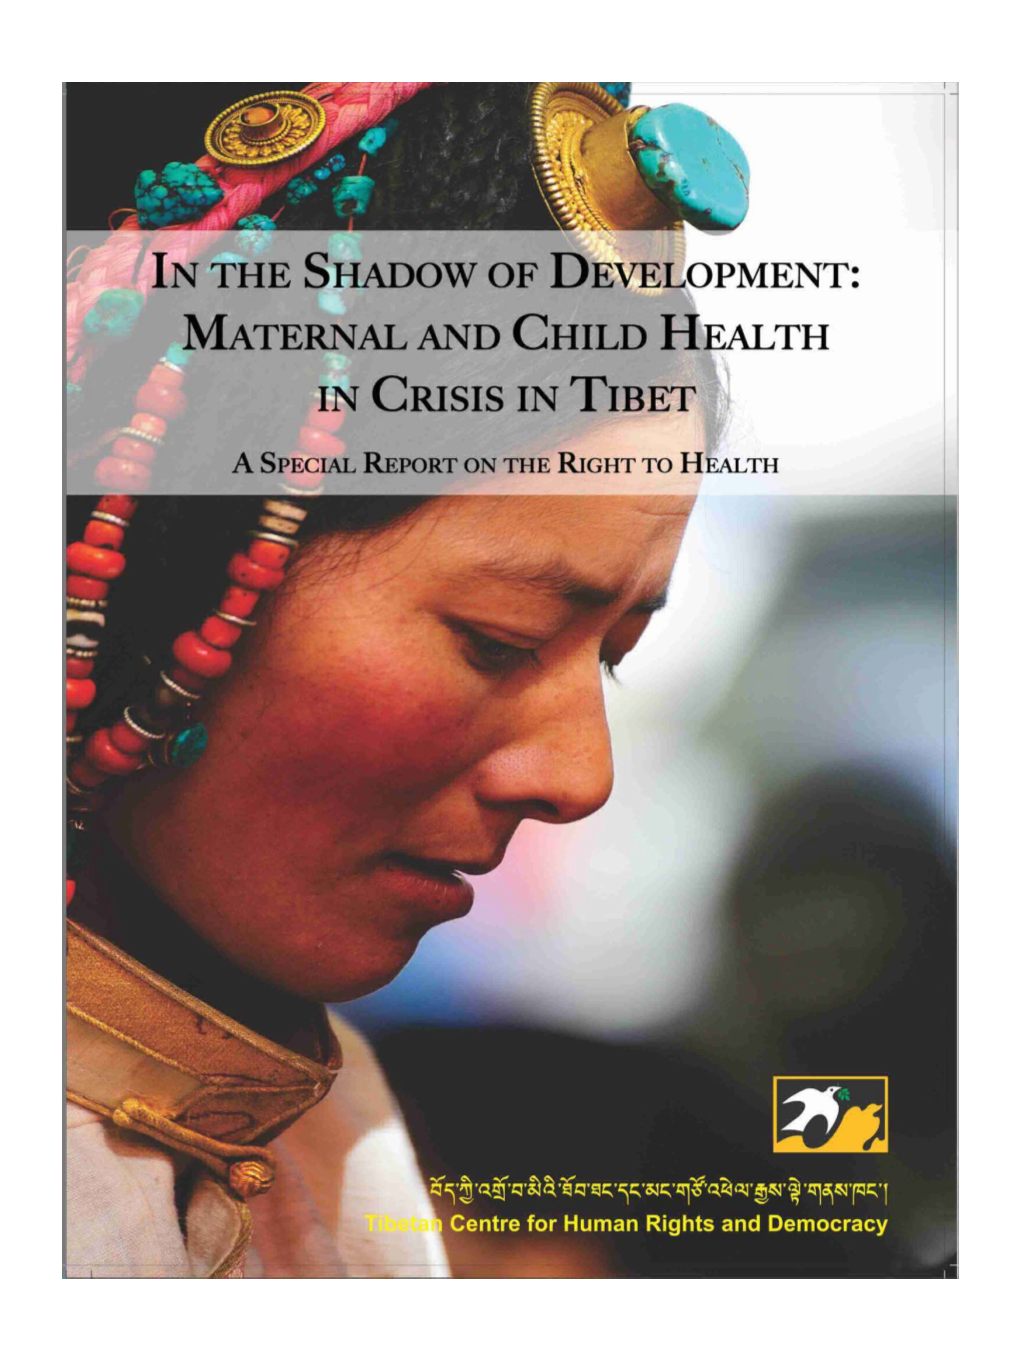 In the Shadow of Development: Maternal and Child Health in Crisis in Tibet